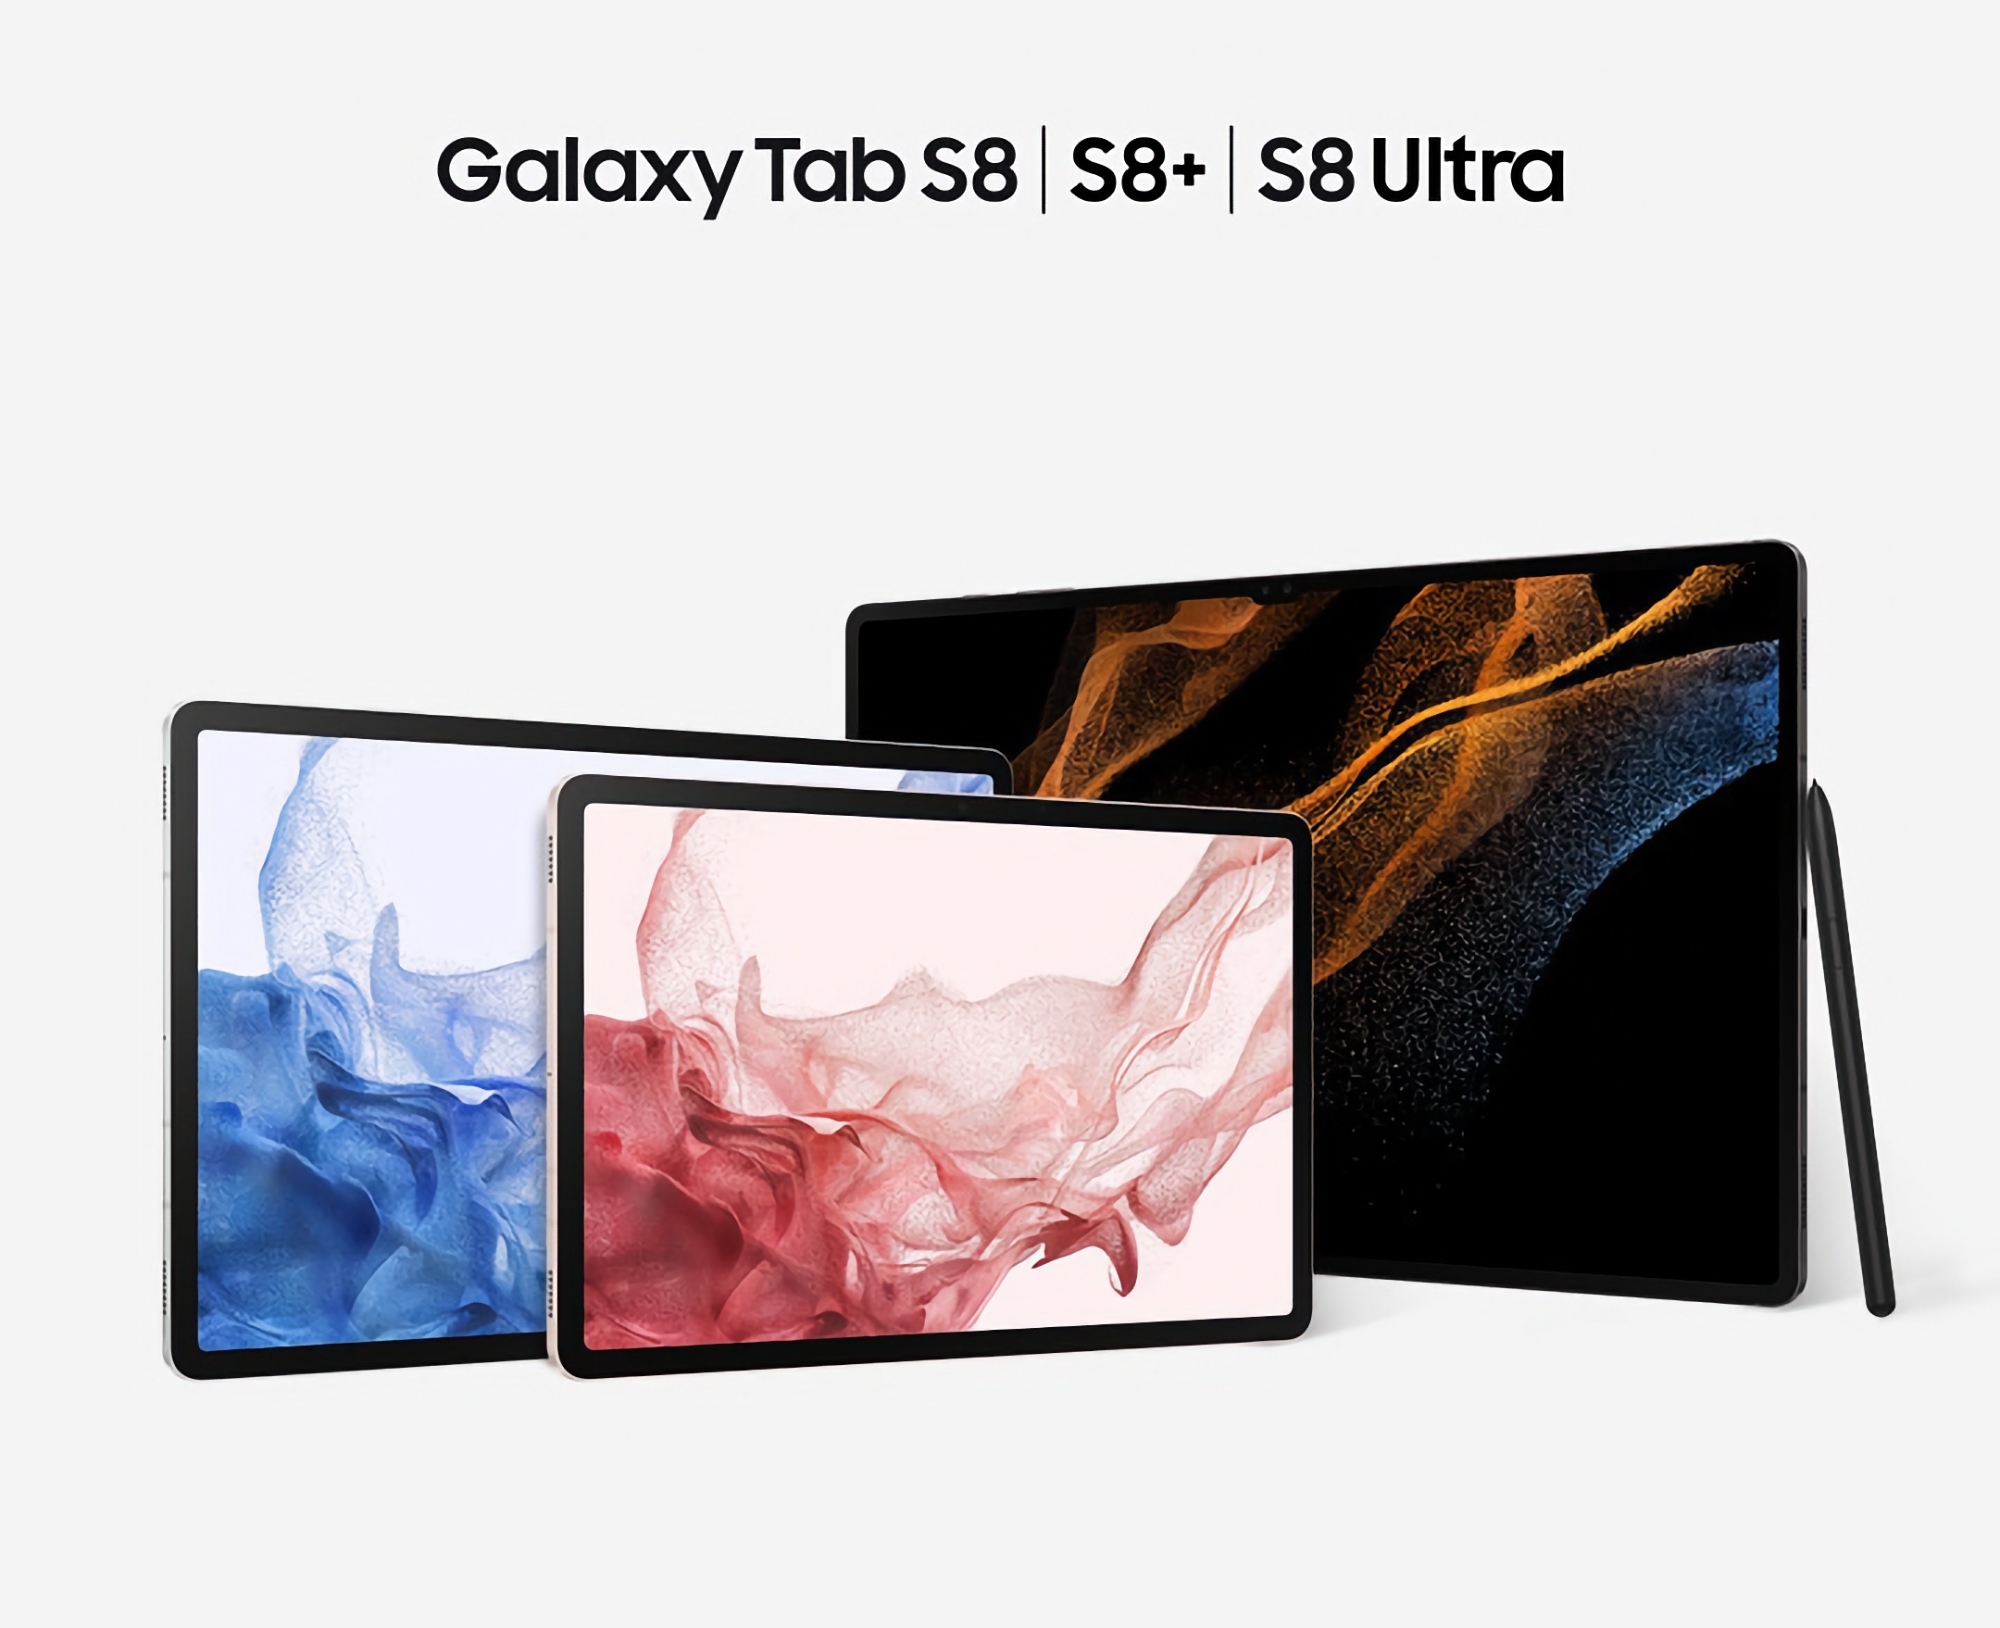 Samsung has released an update for the Galaxy Tab S8, Galaxy Tab S8+ and Galaxy Tab S8 Ultra: what's new